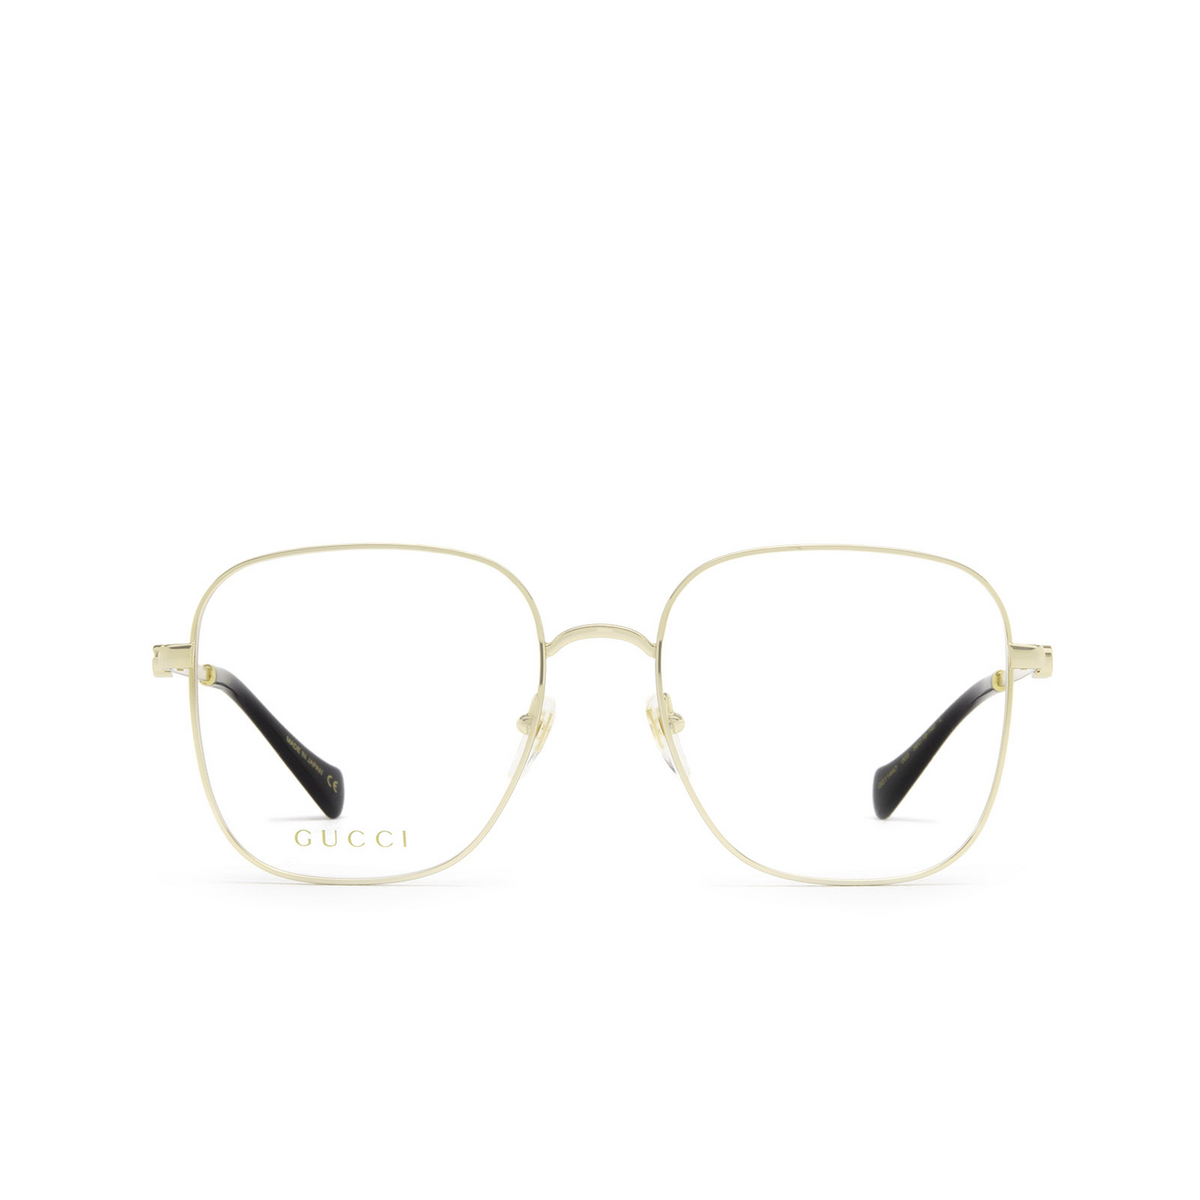 Gucci® Square Eyeglasses: GG1144O color Gold 003 - front view.